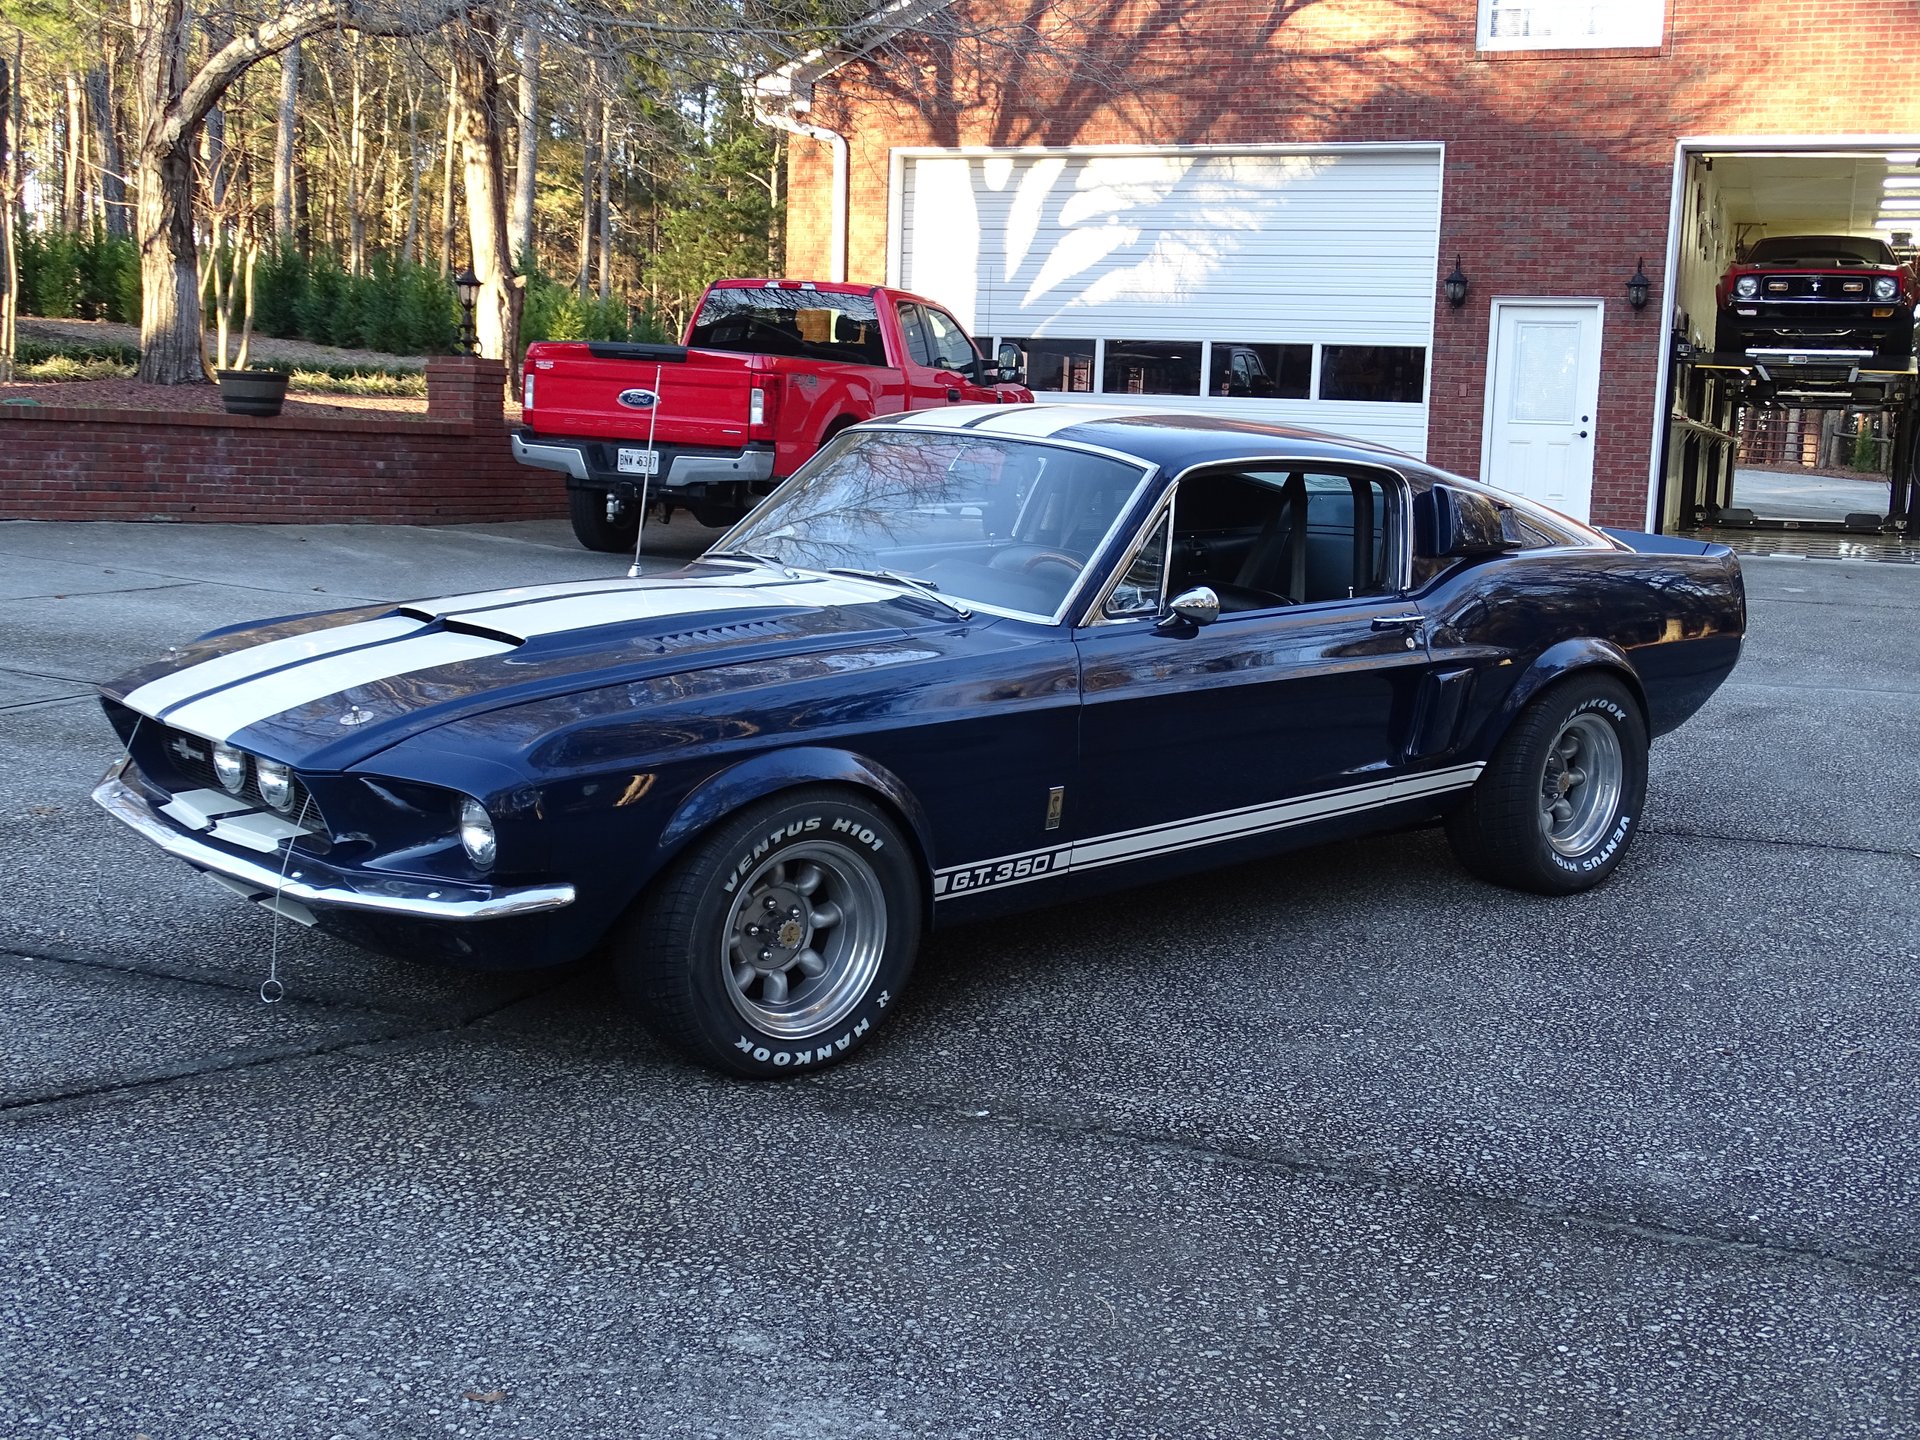 1967 Ford Mustang | GAA Classic Cars